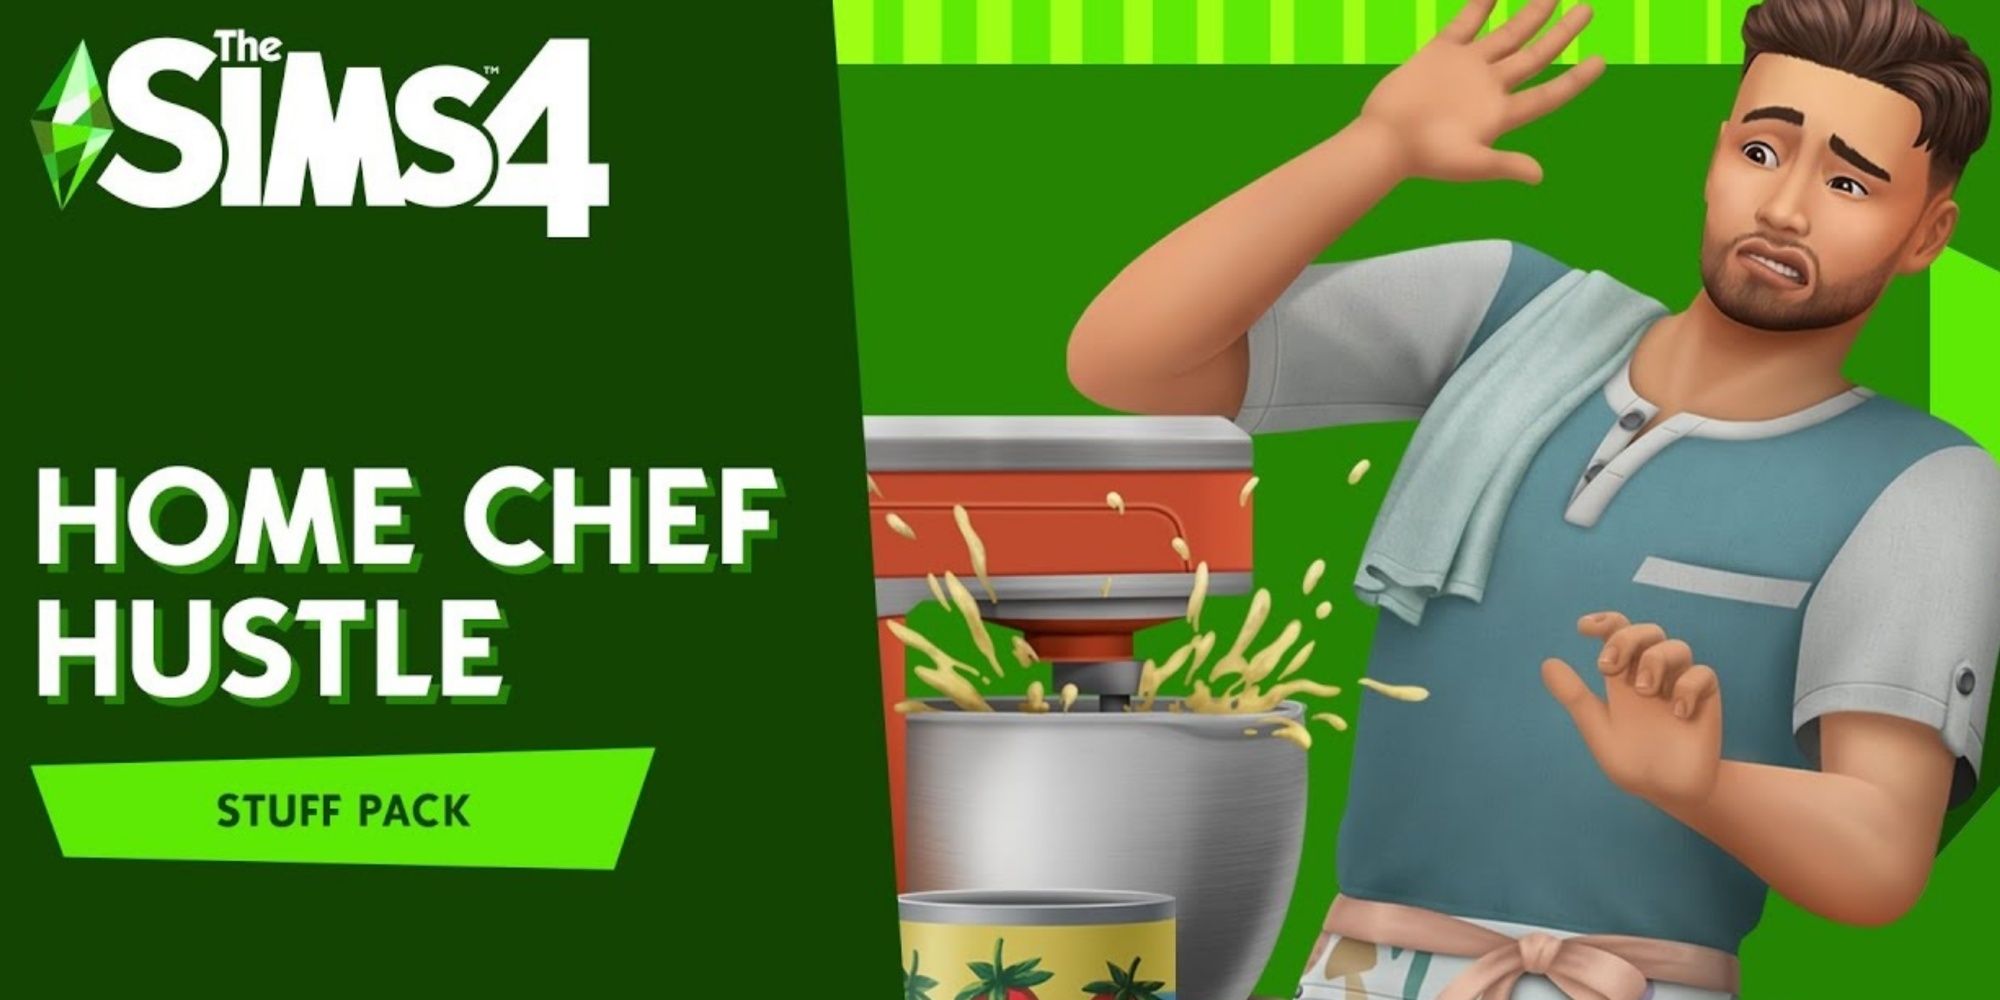 The Sims 4 Home Chef Hustle Stuff Pack Review: Slightly